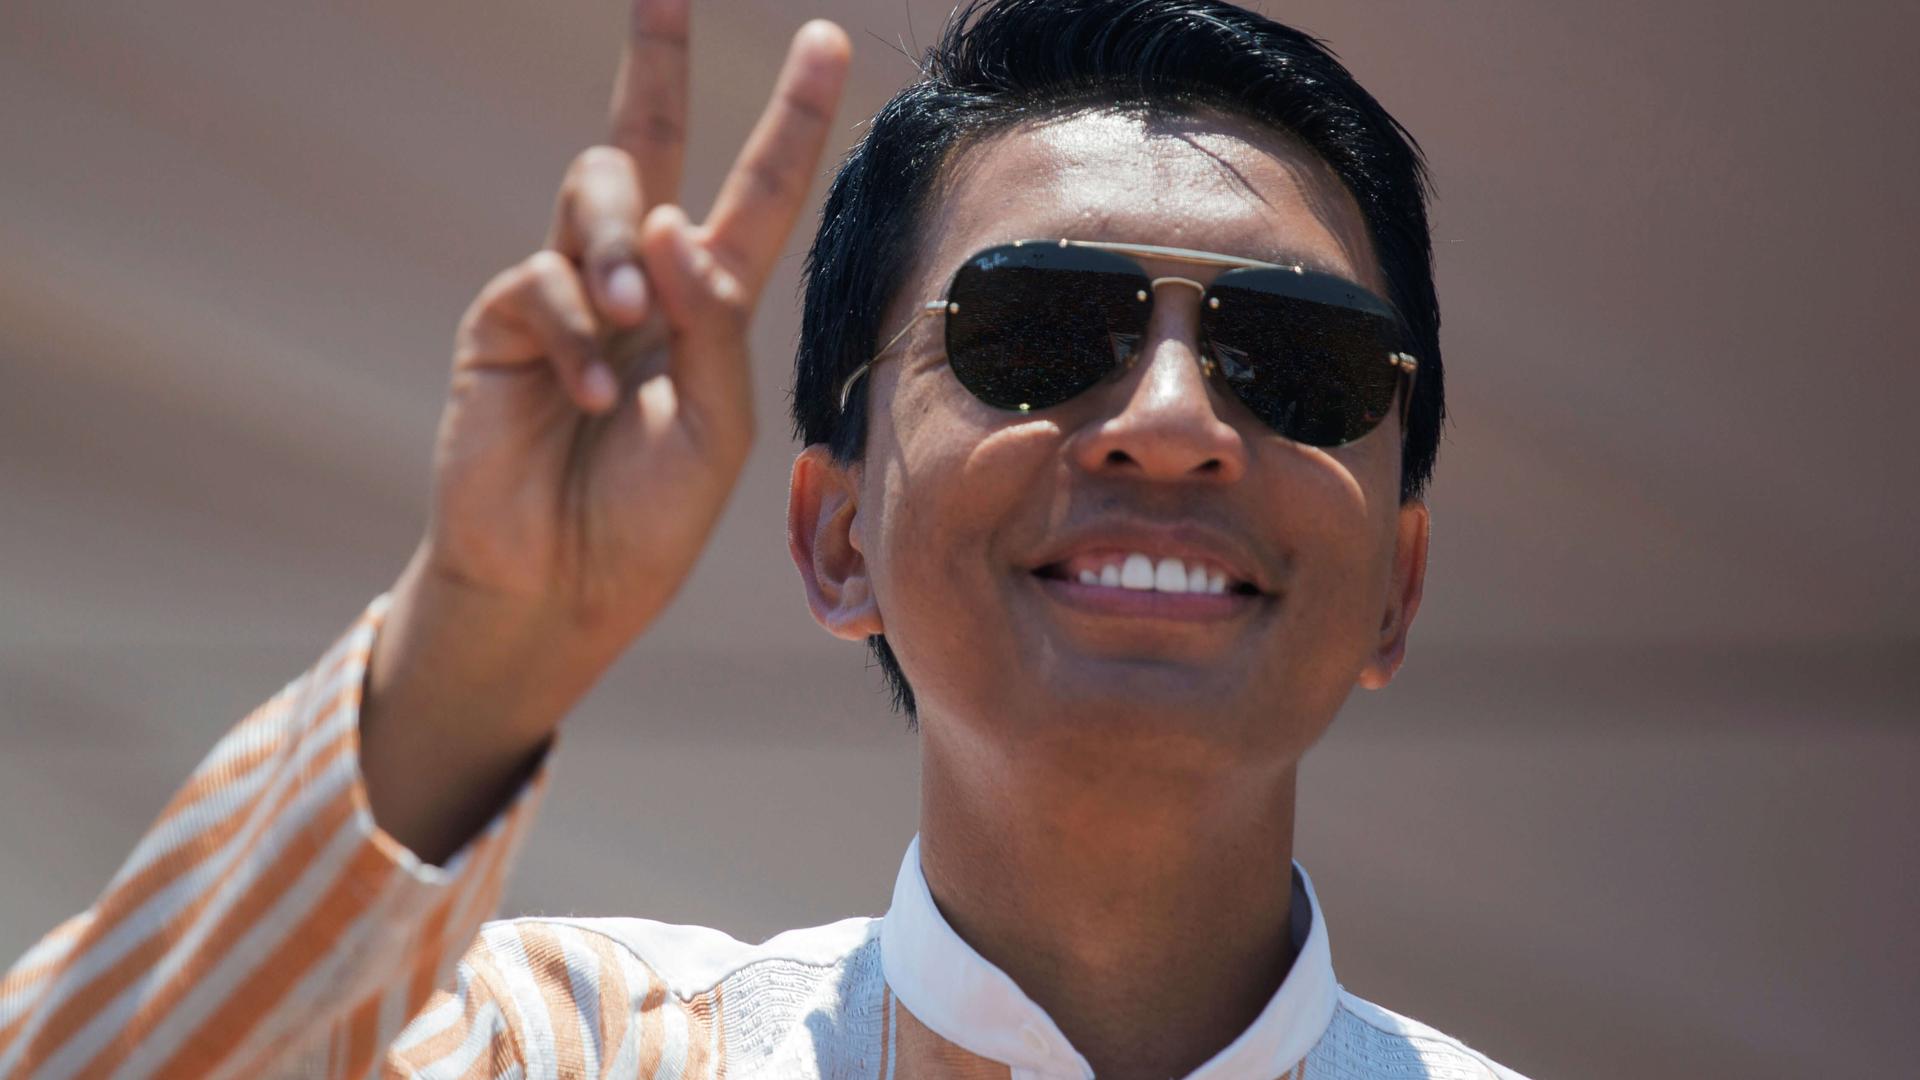 A man with glistening black hair wearing sunglasses waves to the crowd. 